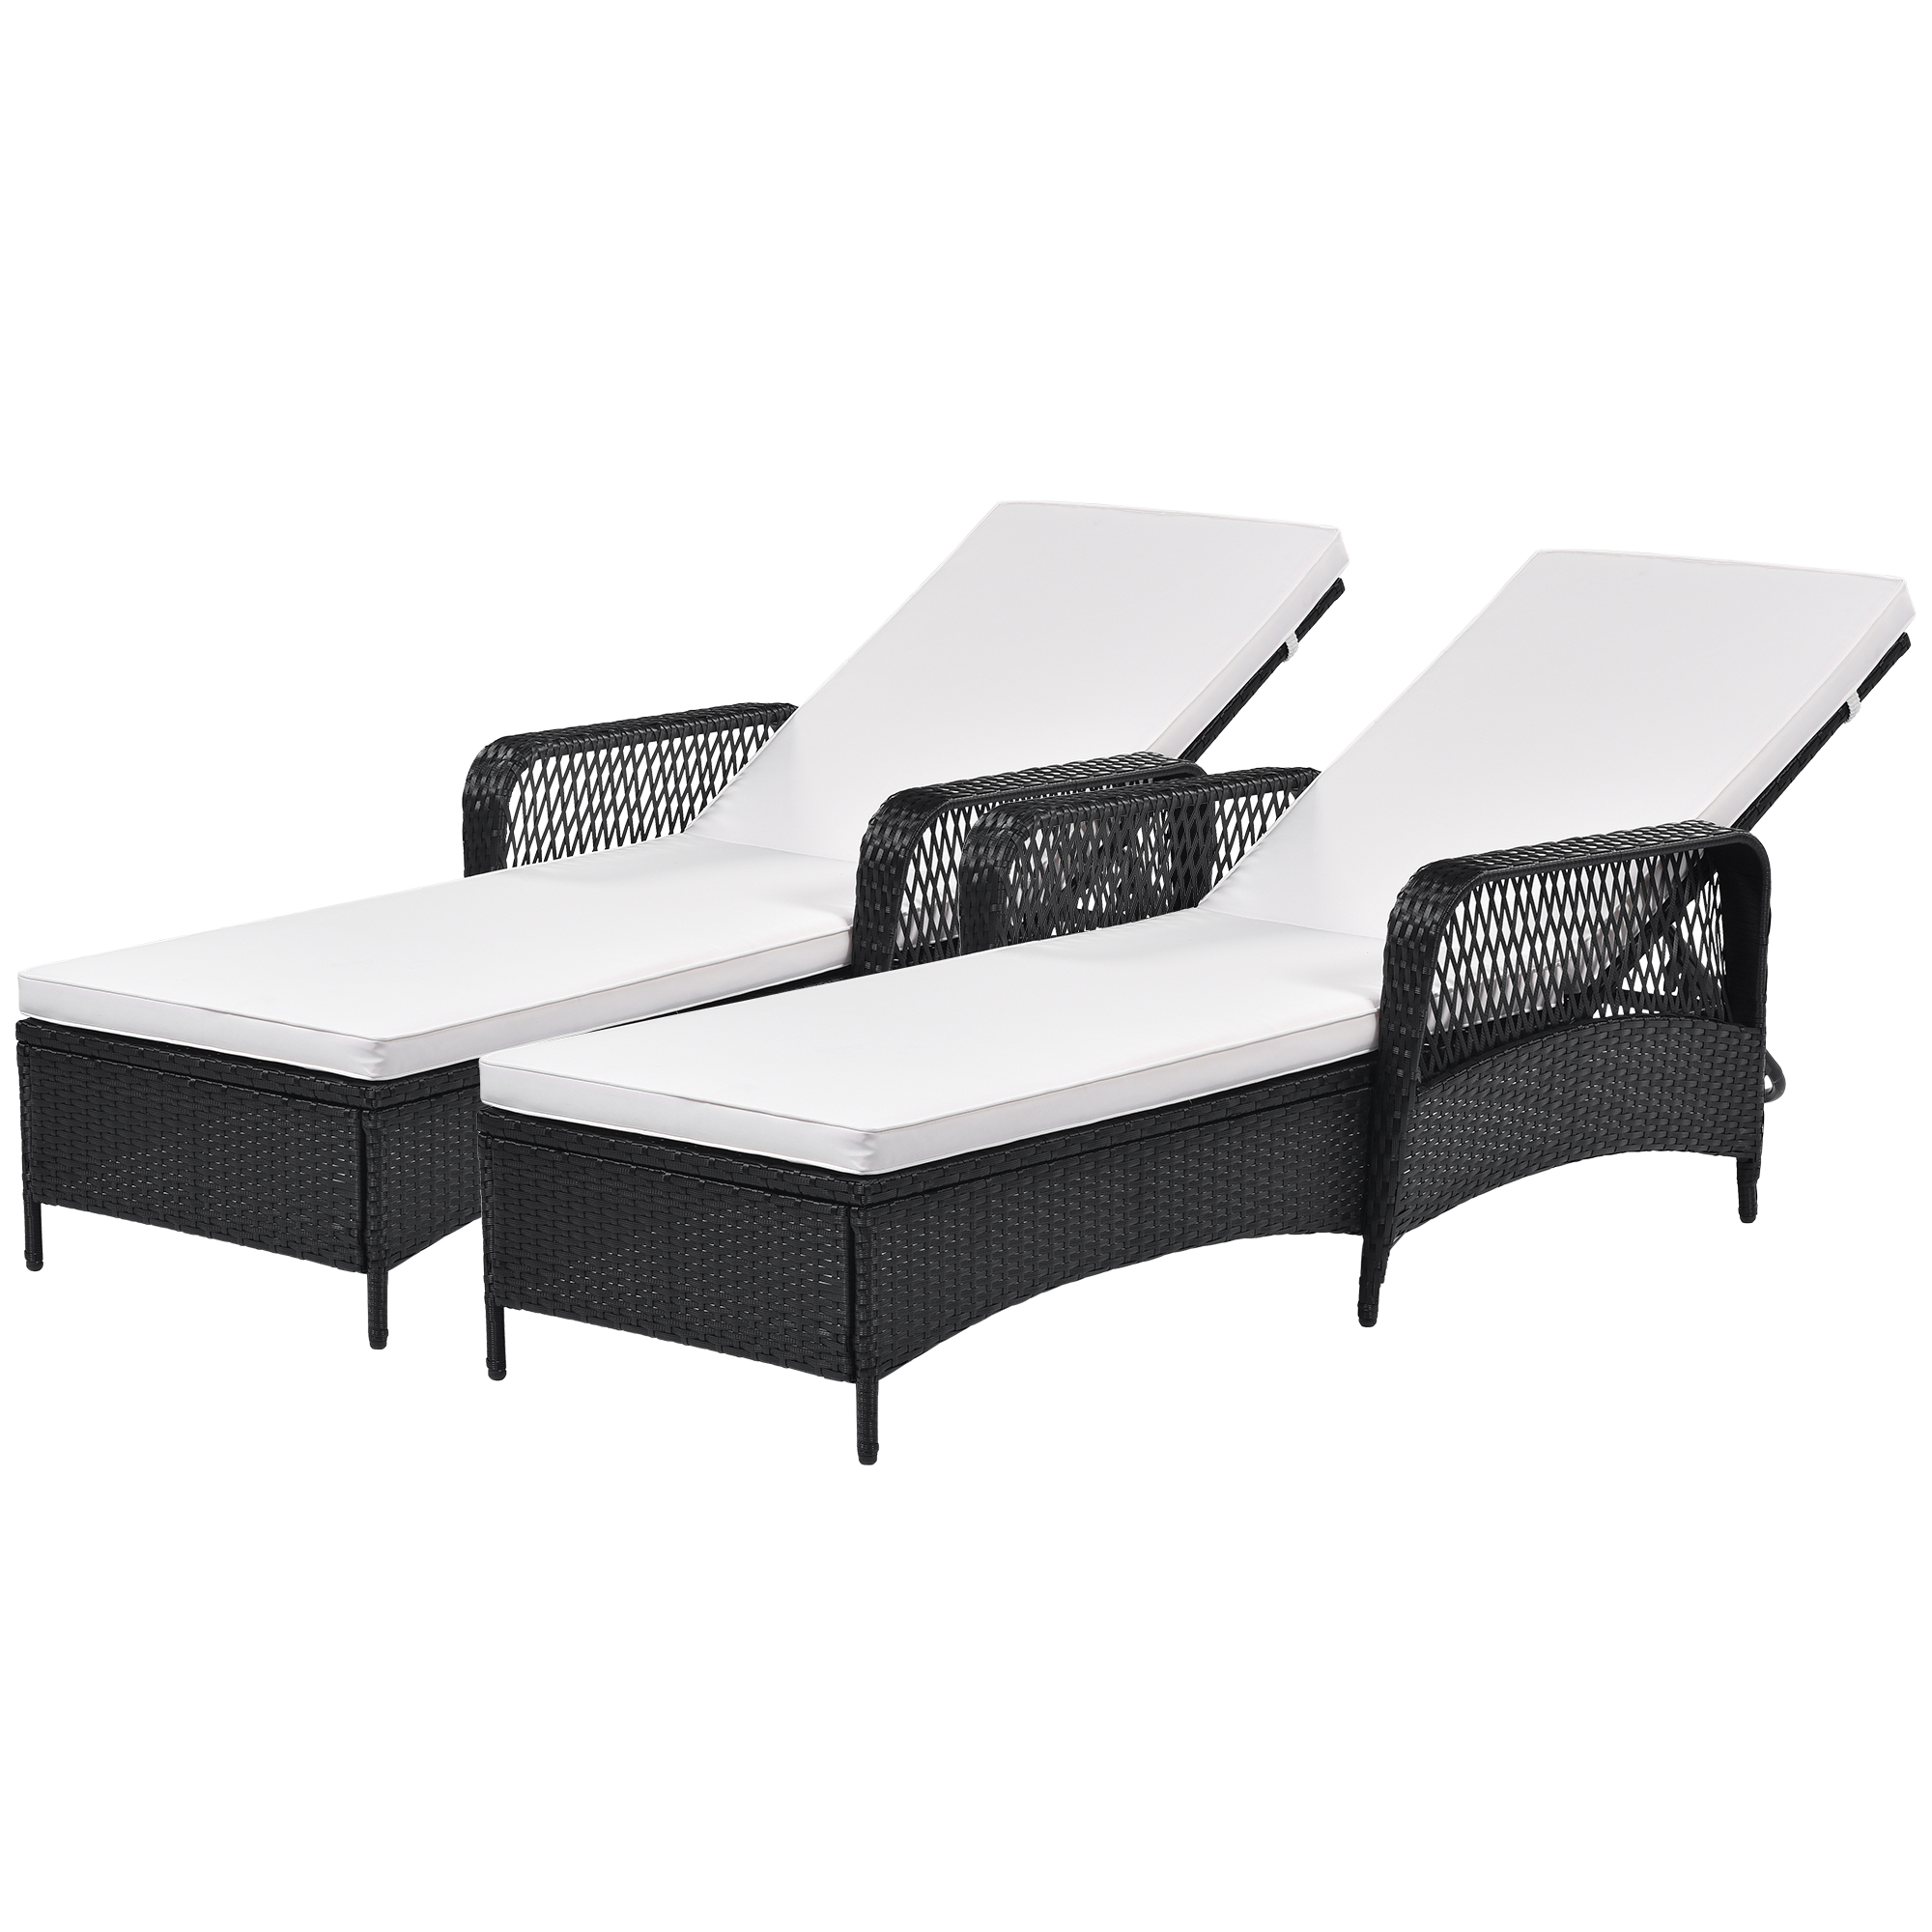 Canddidliike Adjustable Reclining Patio Chairs w/Armrest, Water Resistant Beige Cushions, 2-Pcs Set - image 3 of 10